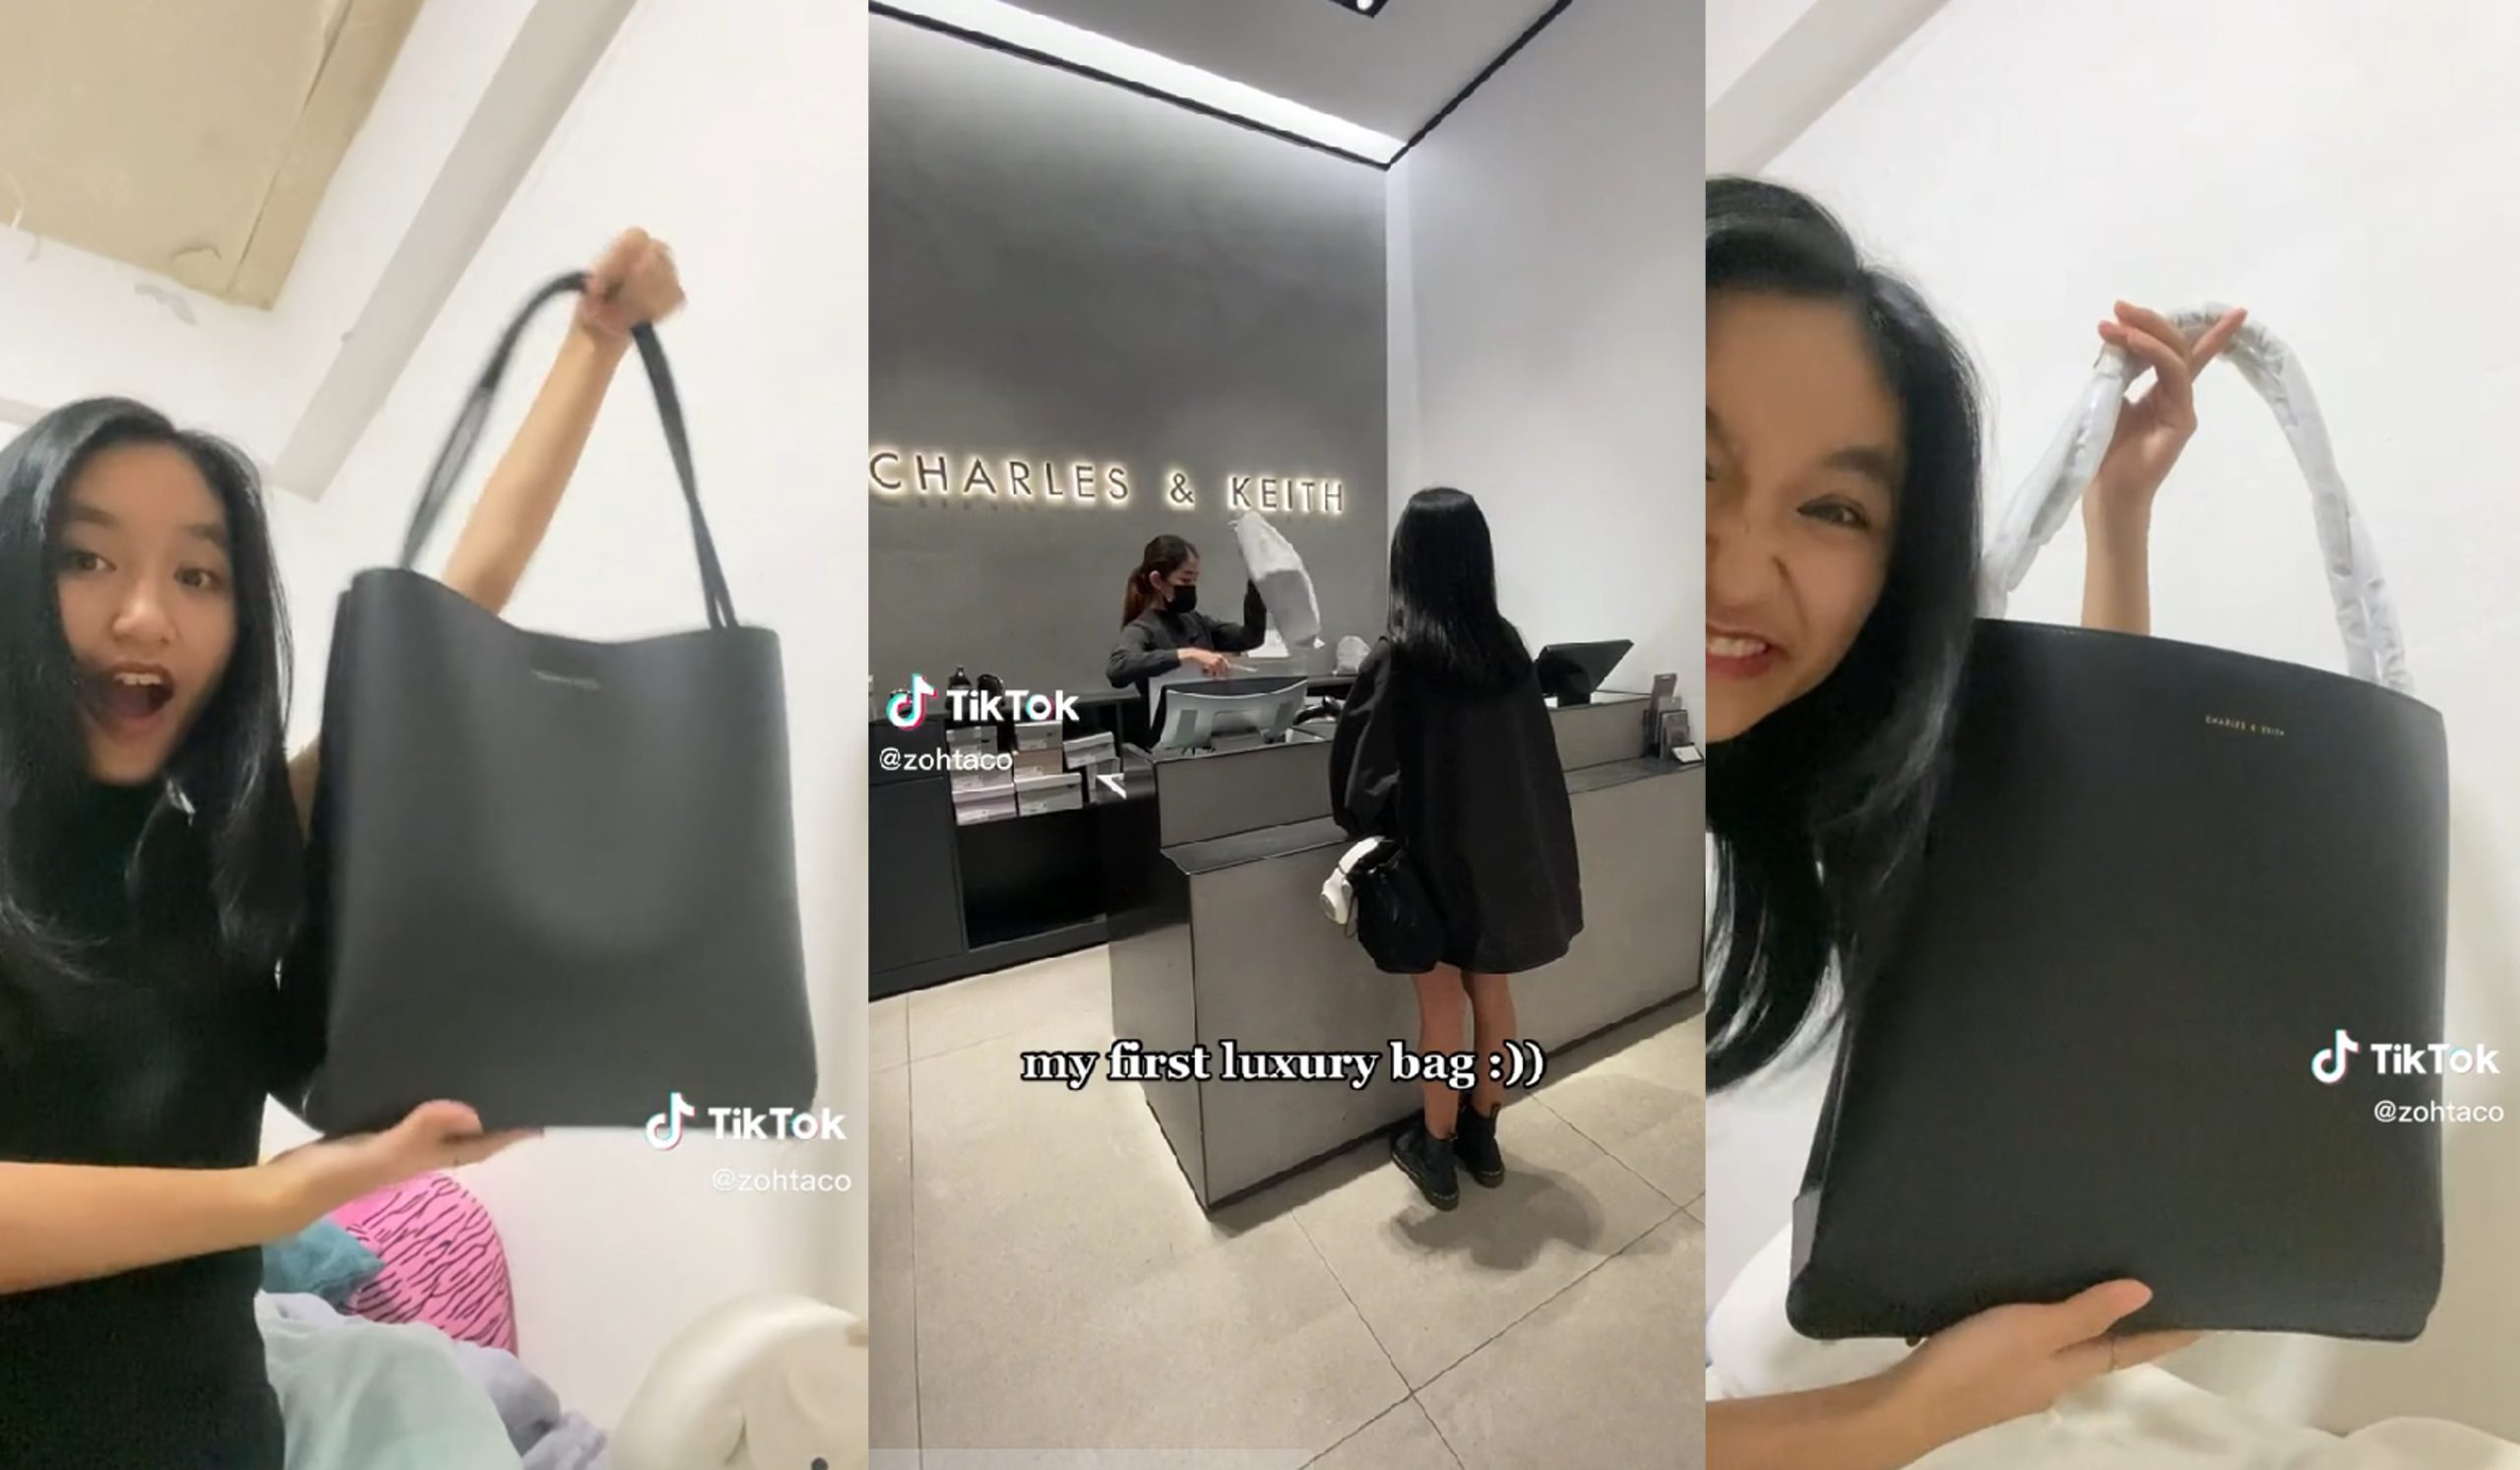 Teen Shamed For Saying Her Charles & Keith Bag is a Luxury, Gets Invited  For Lunch & Tour of HQ by Founders - WORLD OF BUZZ